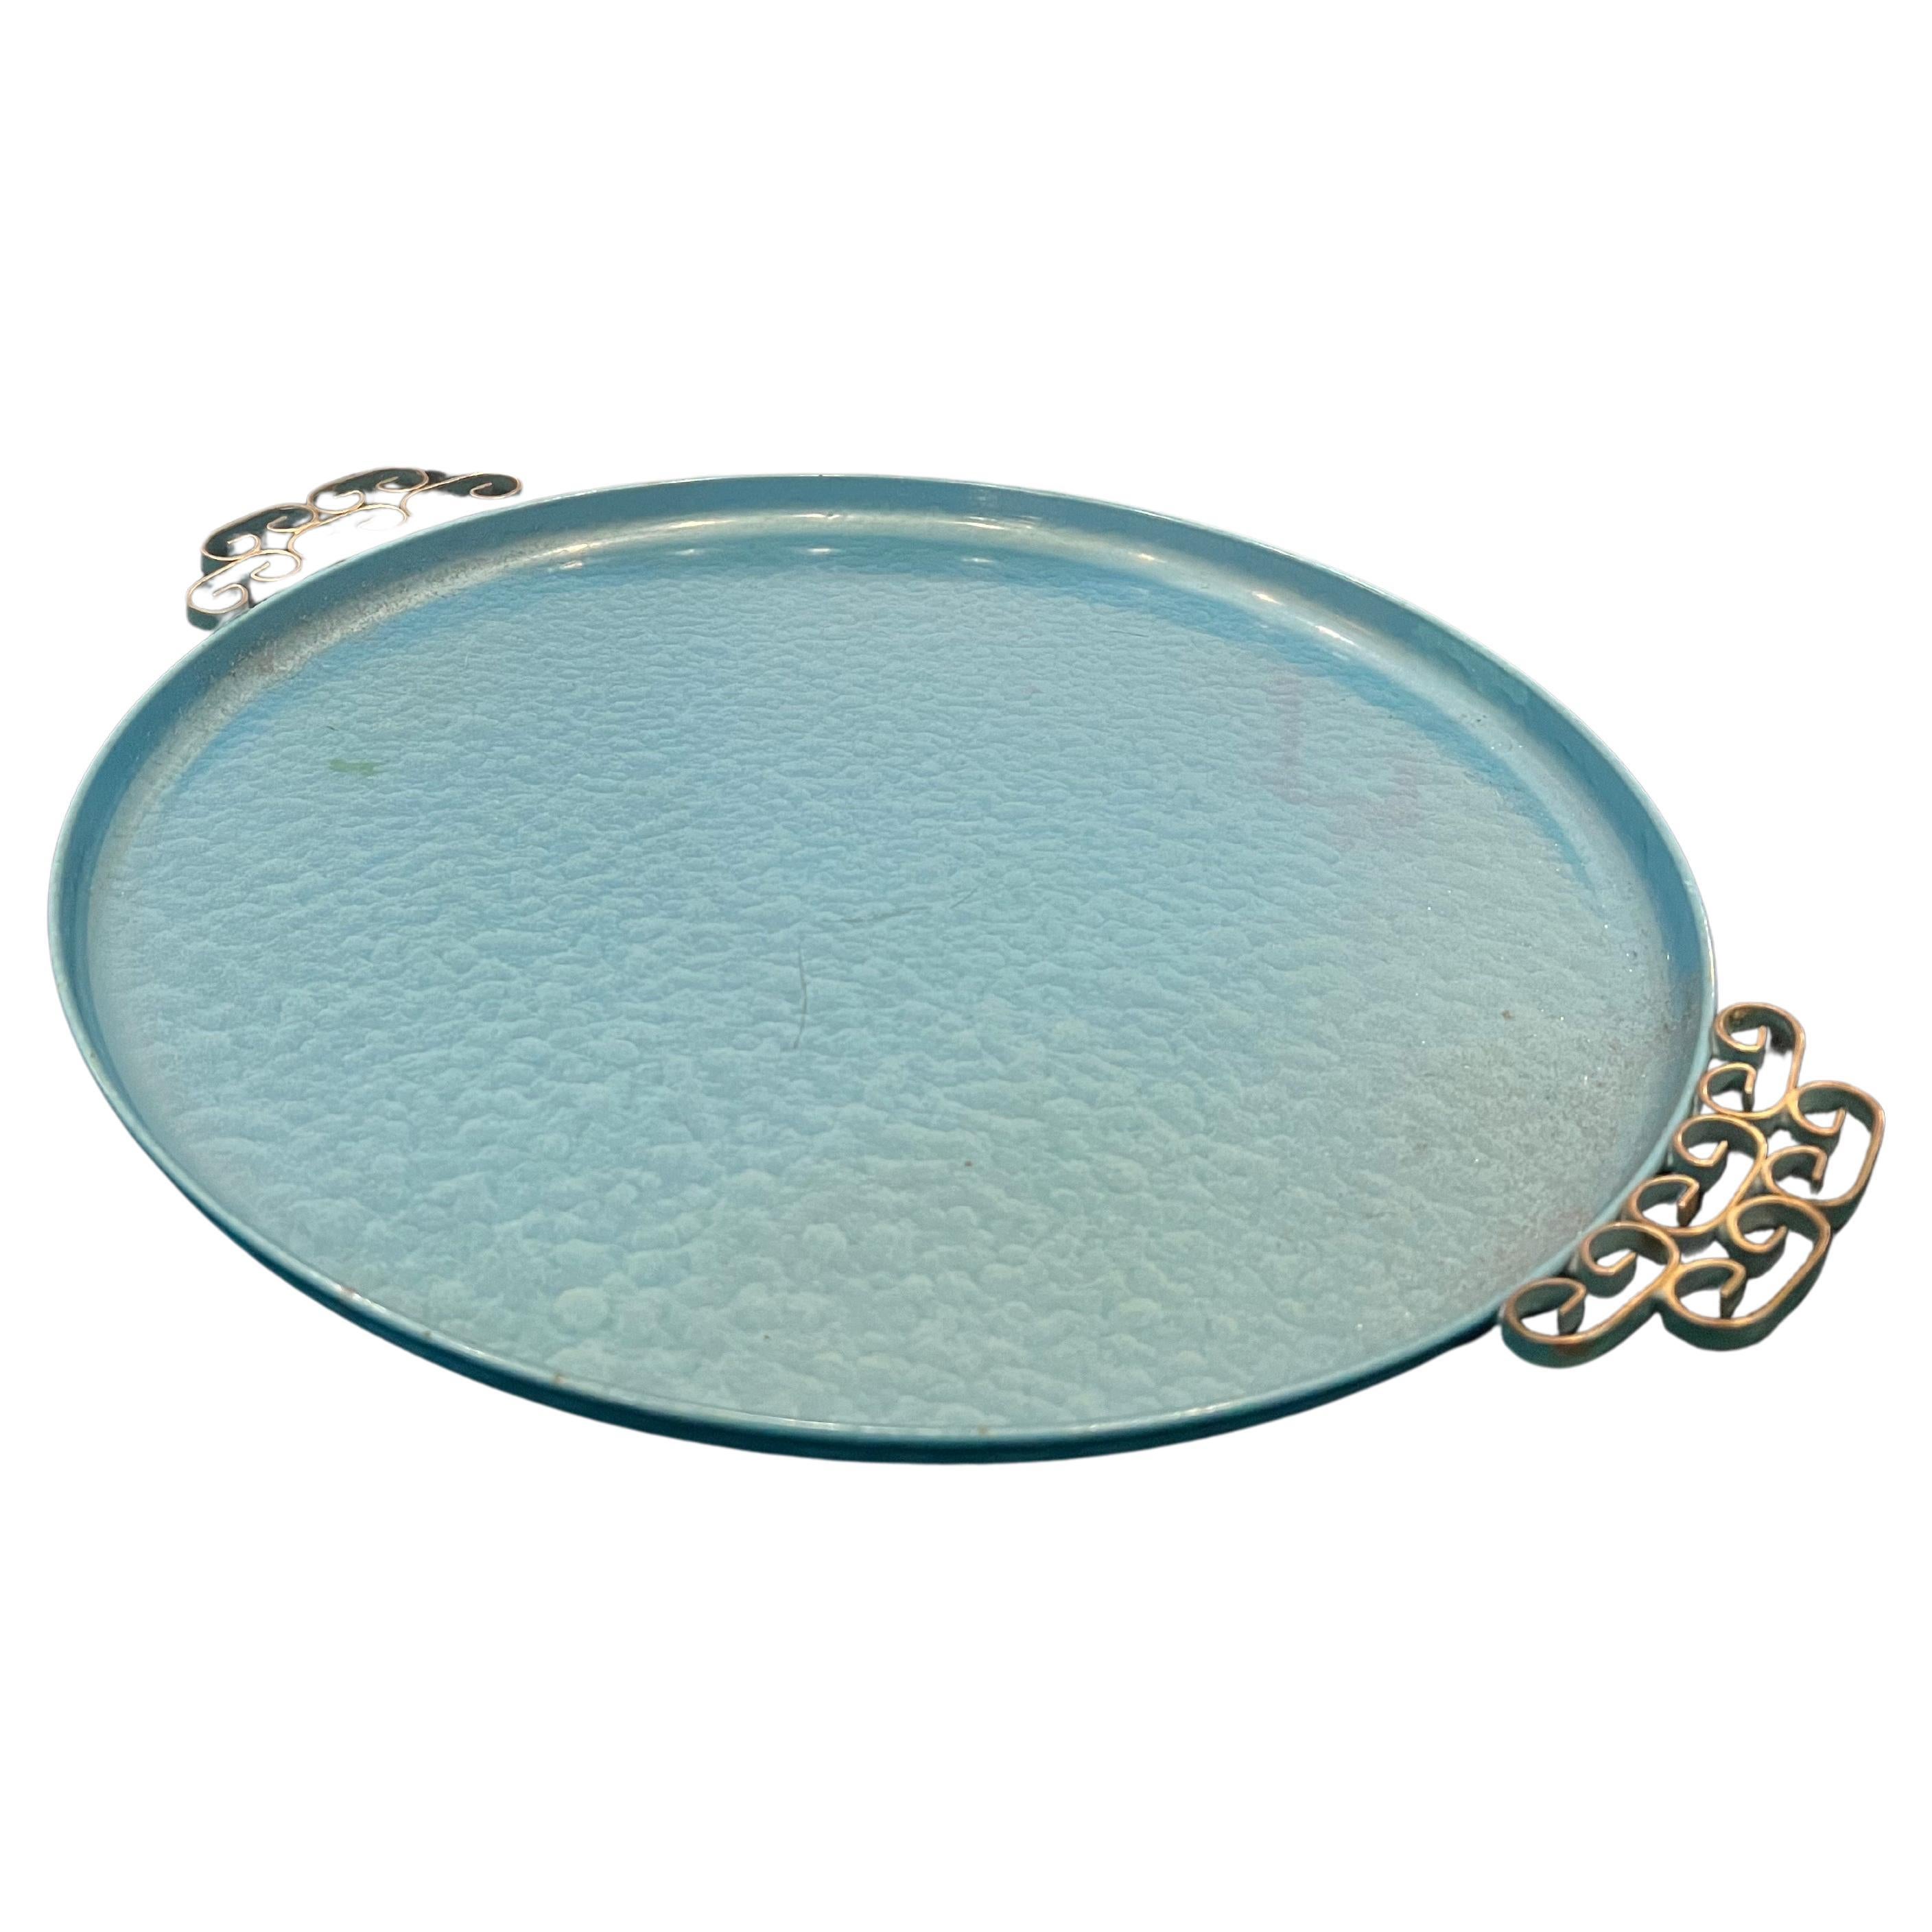 North American Gorgeous Hollywood Regency Enameled Finish Round Tray by Moire Glaze Kyes